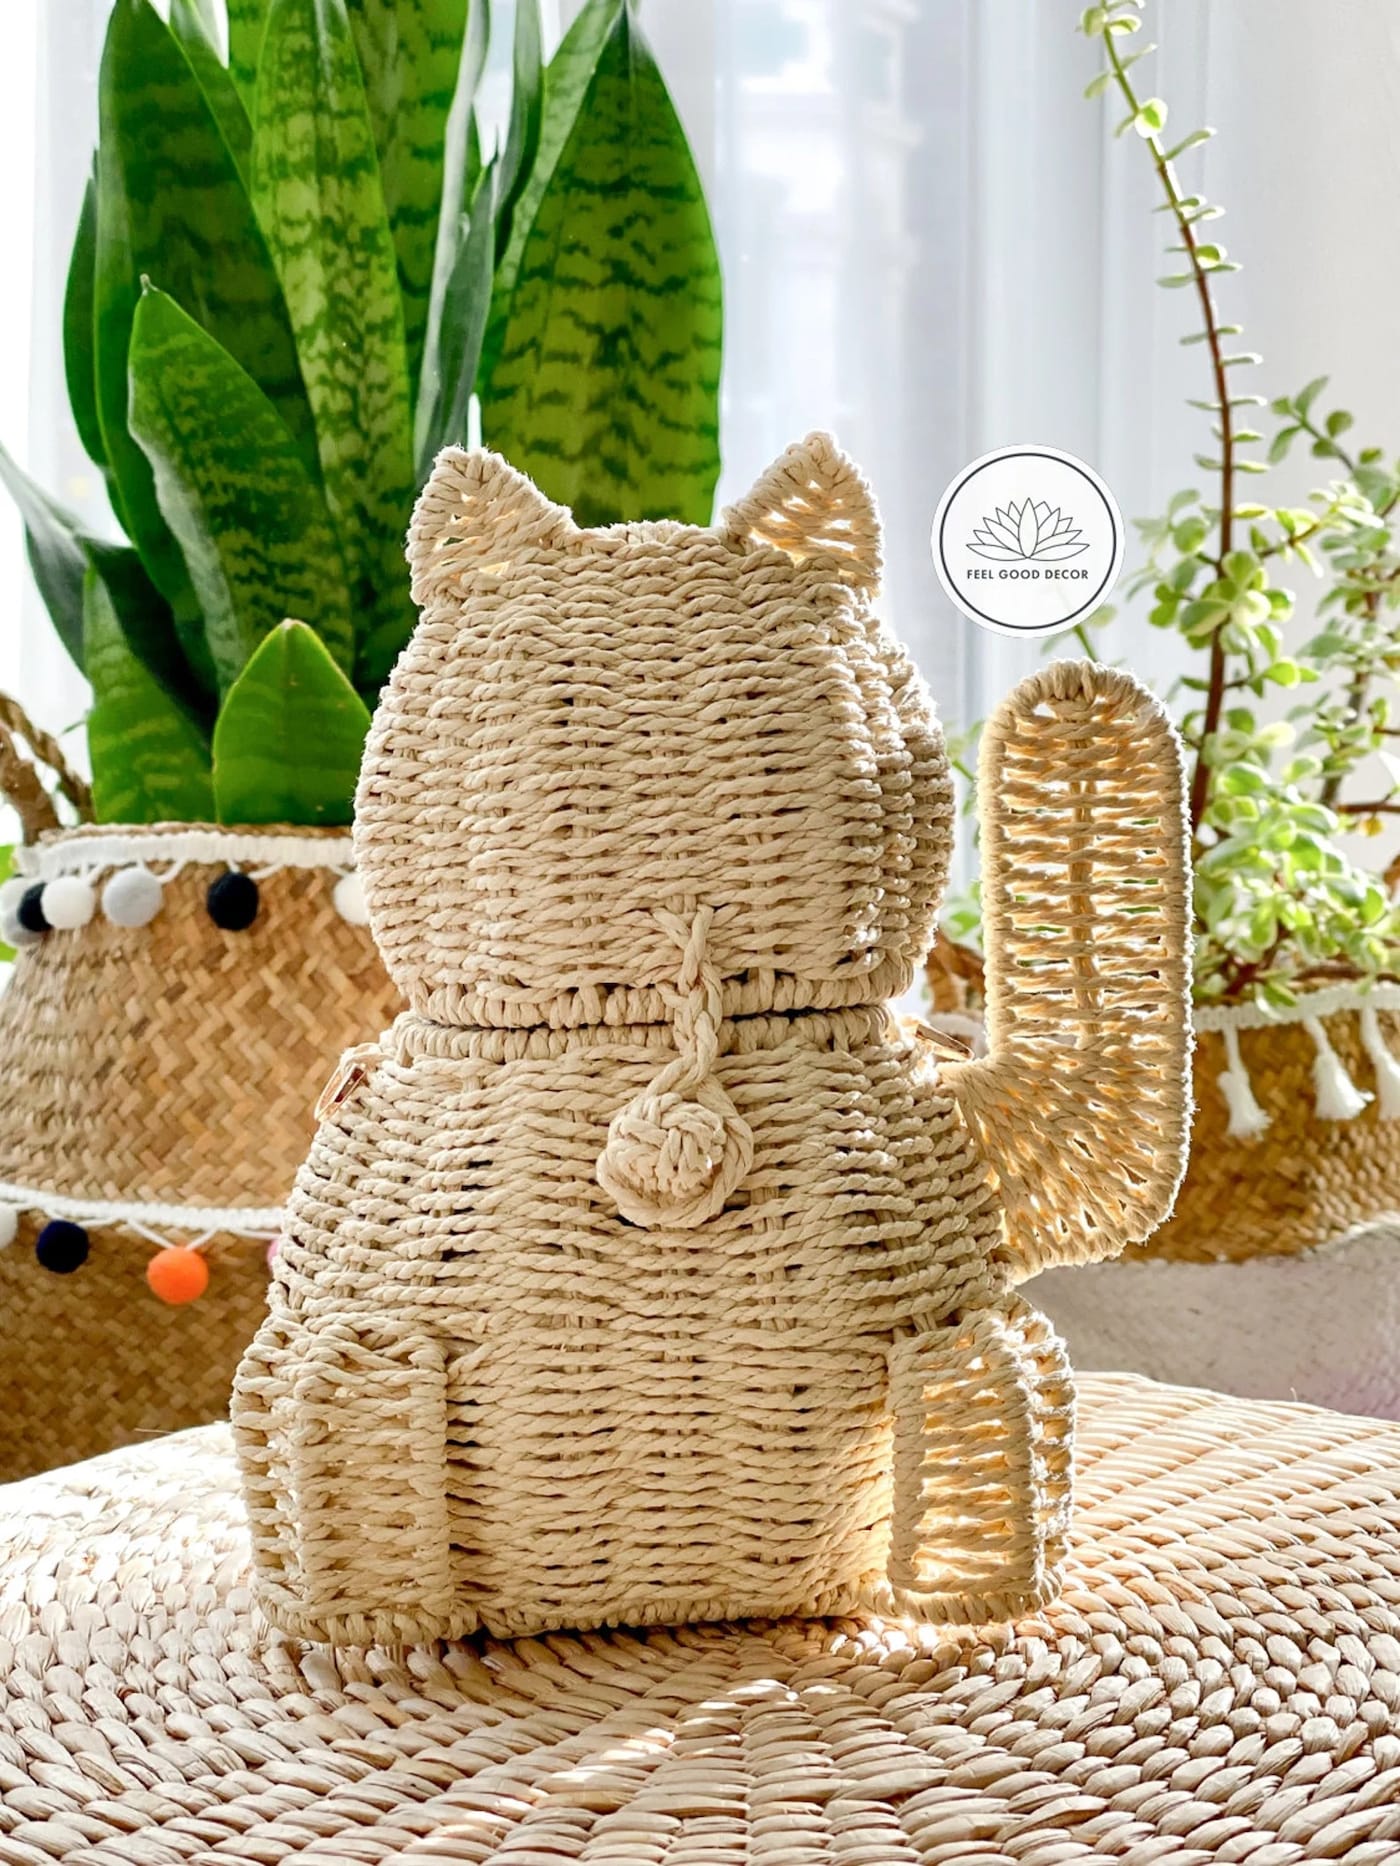 Handmade Japanese Lucky Cat Natural Straw Wicker Storage Basket and Bag -  Feel Good Decor